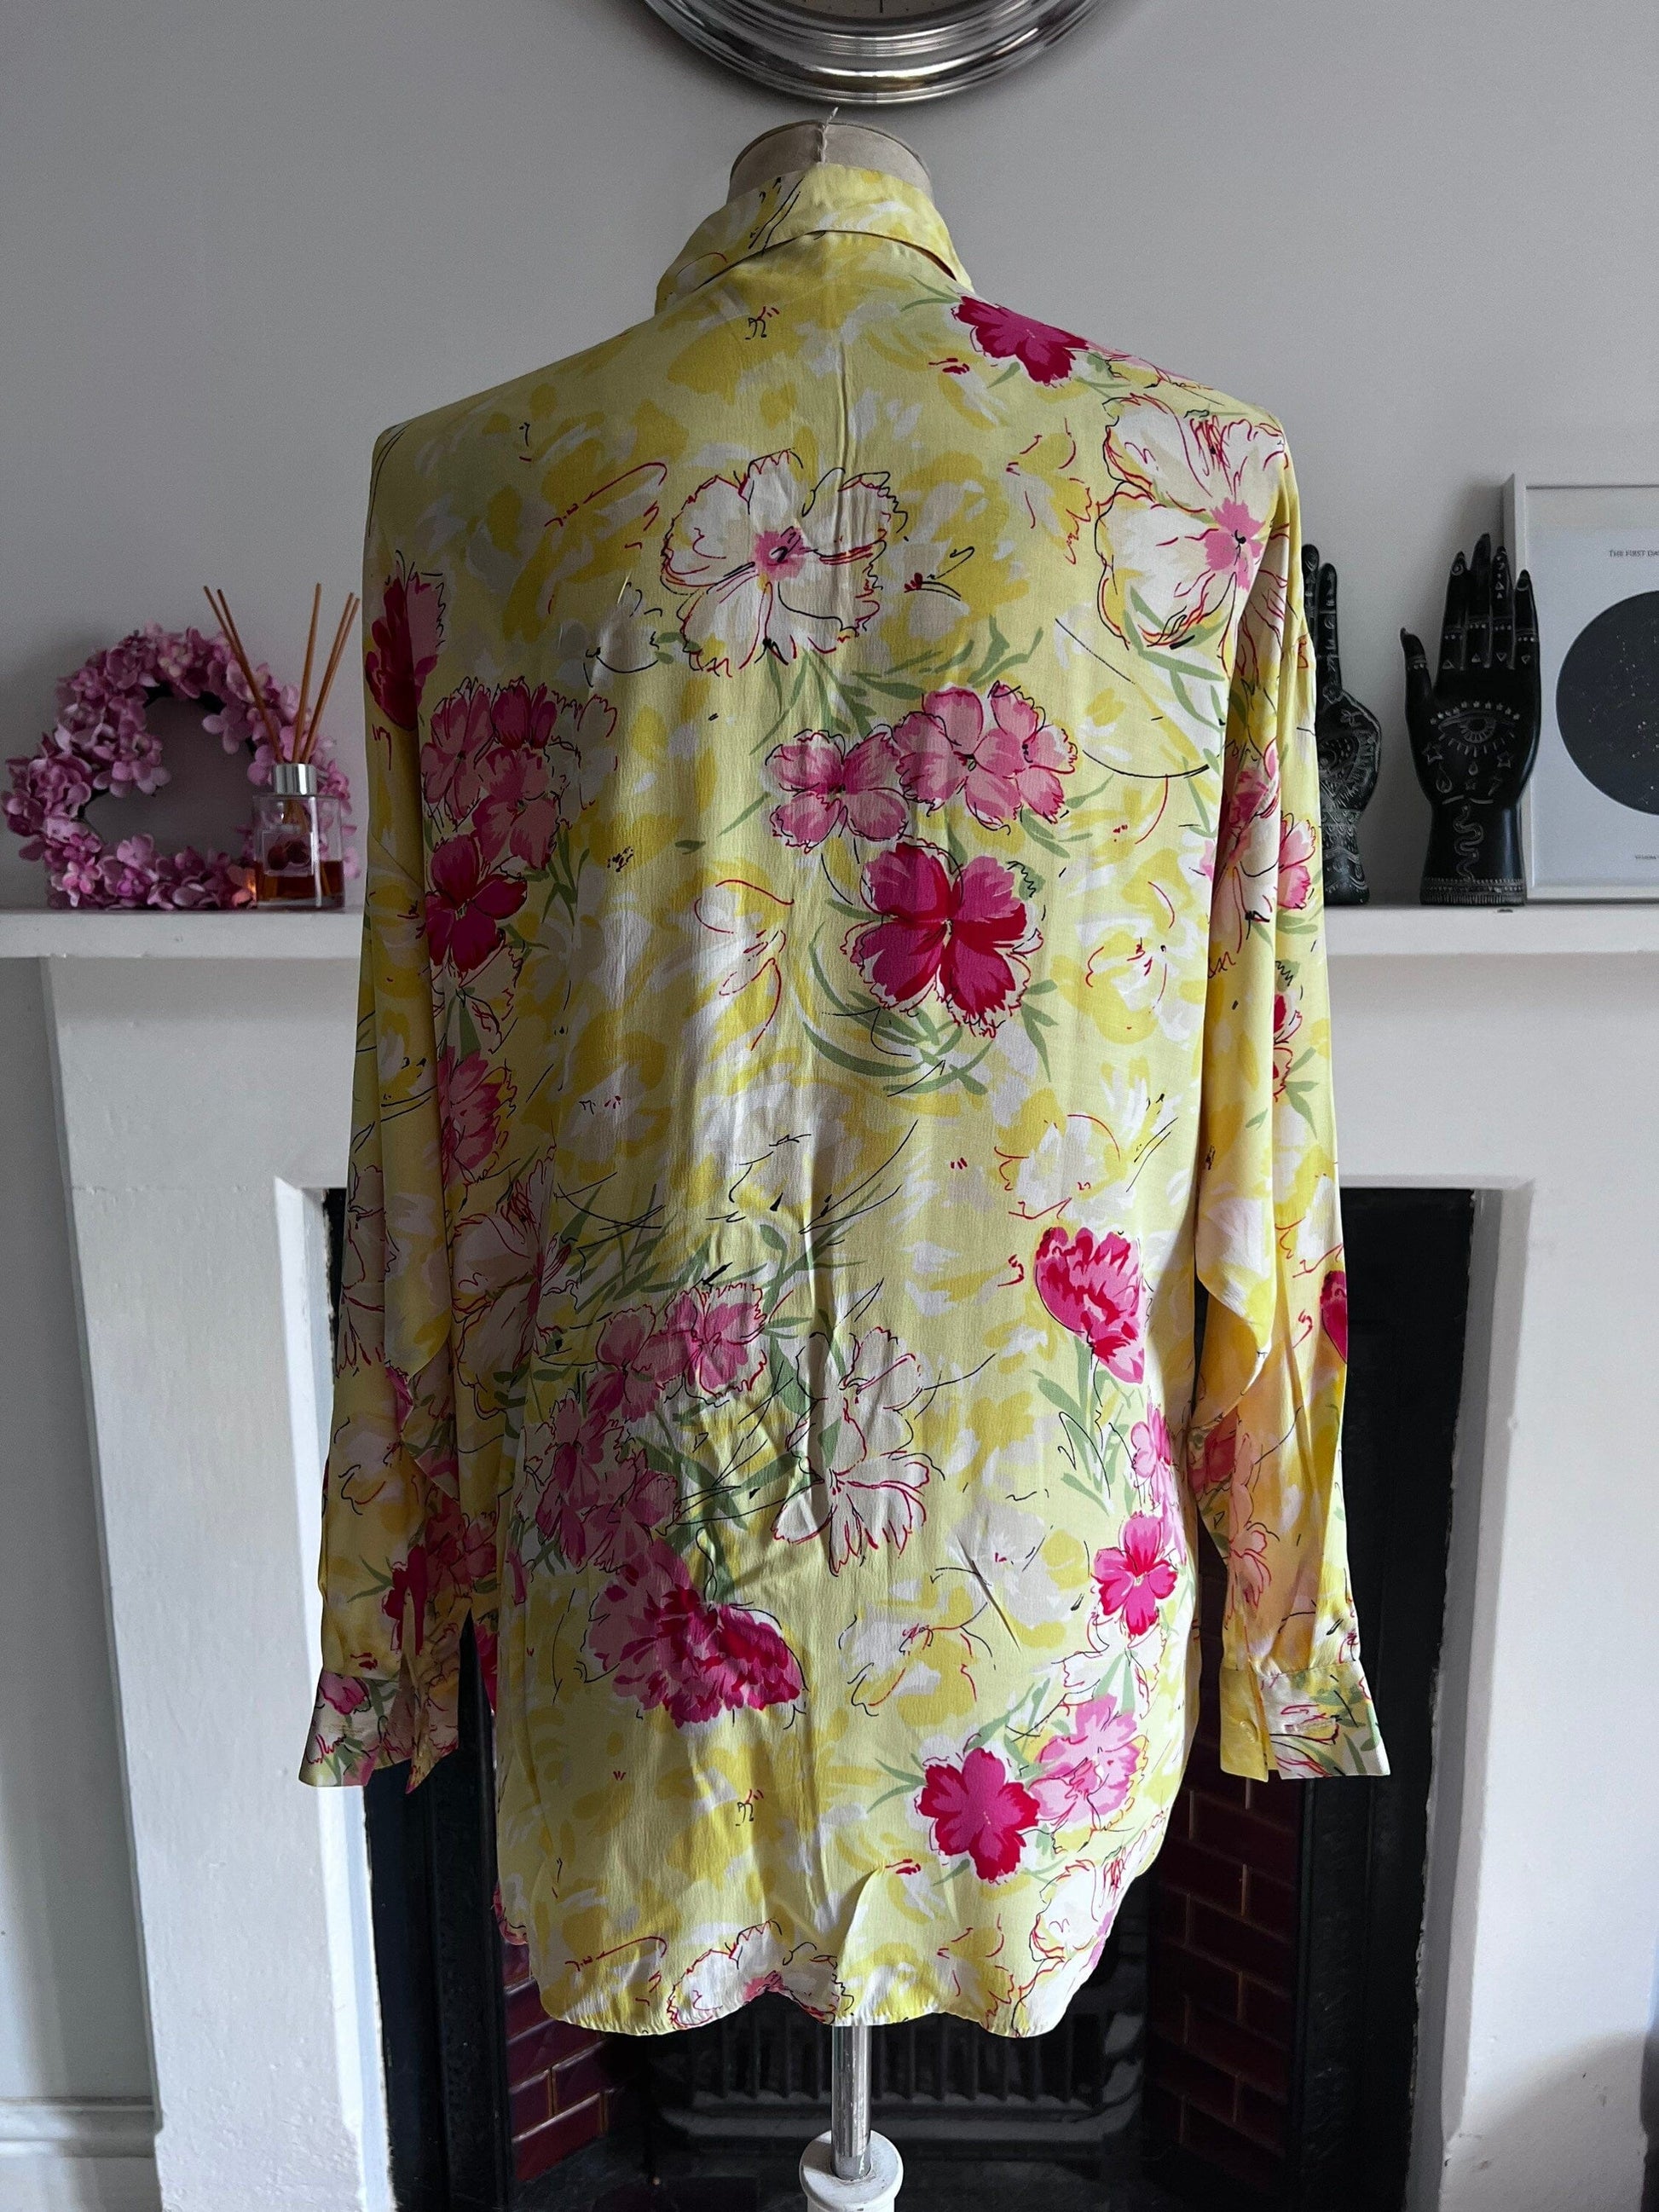 Vintage yellow floral Blouse - long sleeves button front high neck Semi Sheer Shirt - UKM